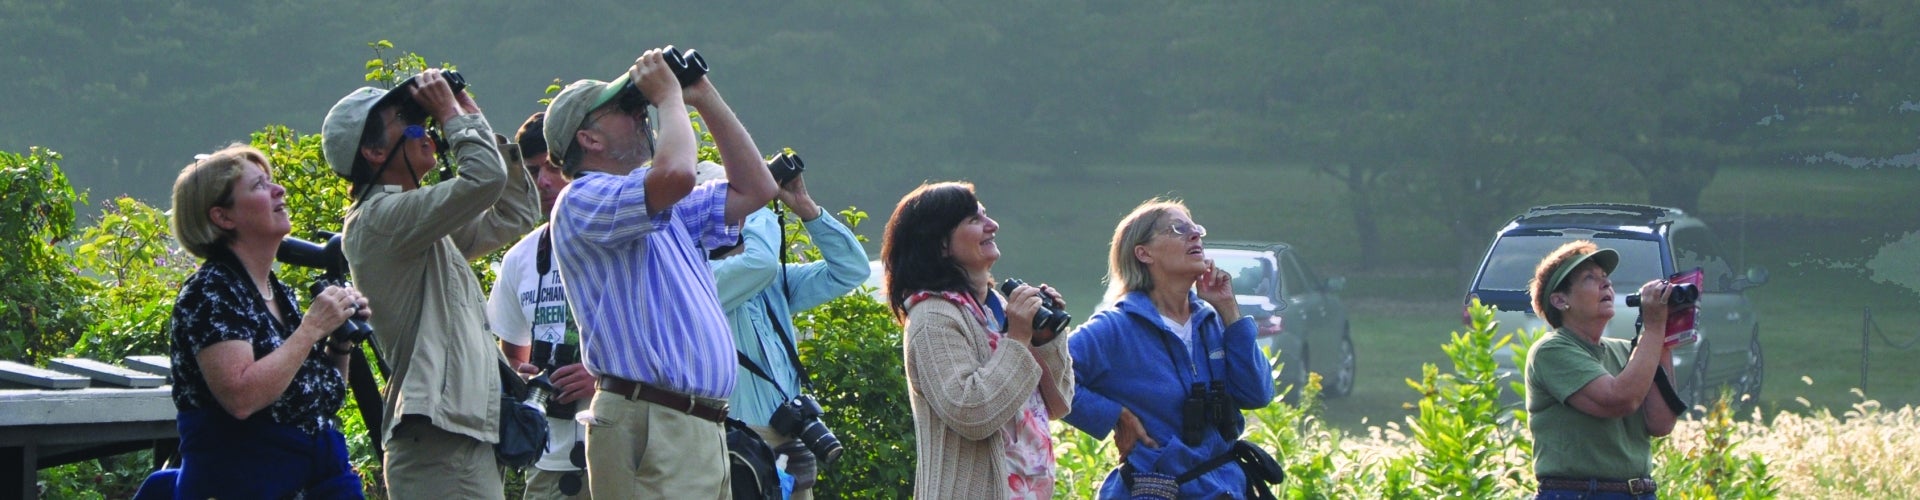 A group of people holding binoculars look up at the sky. 